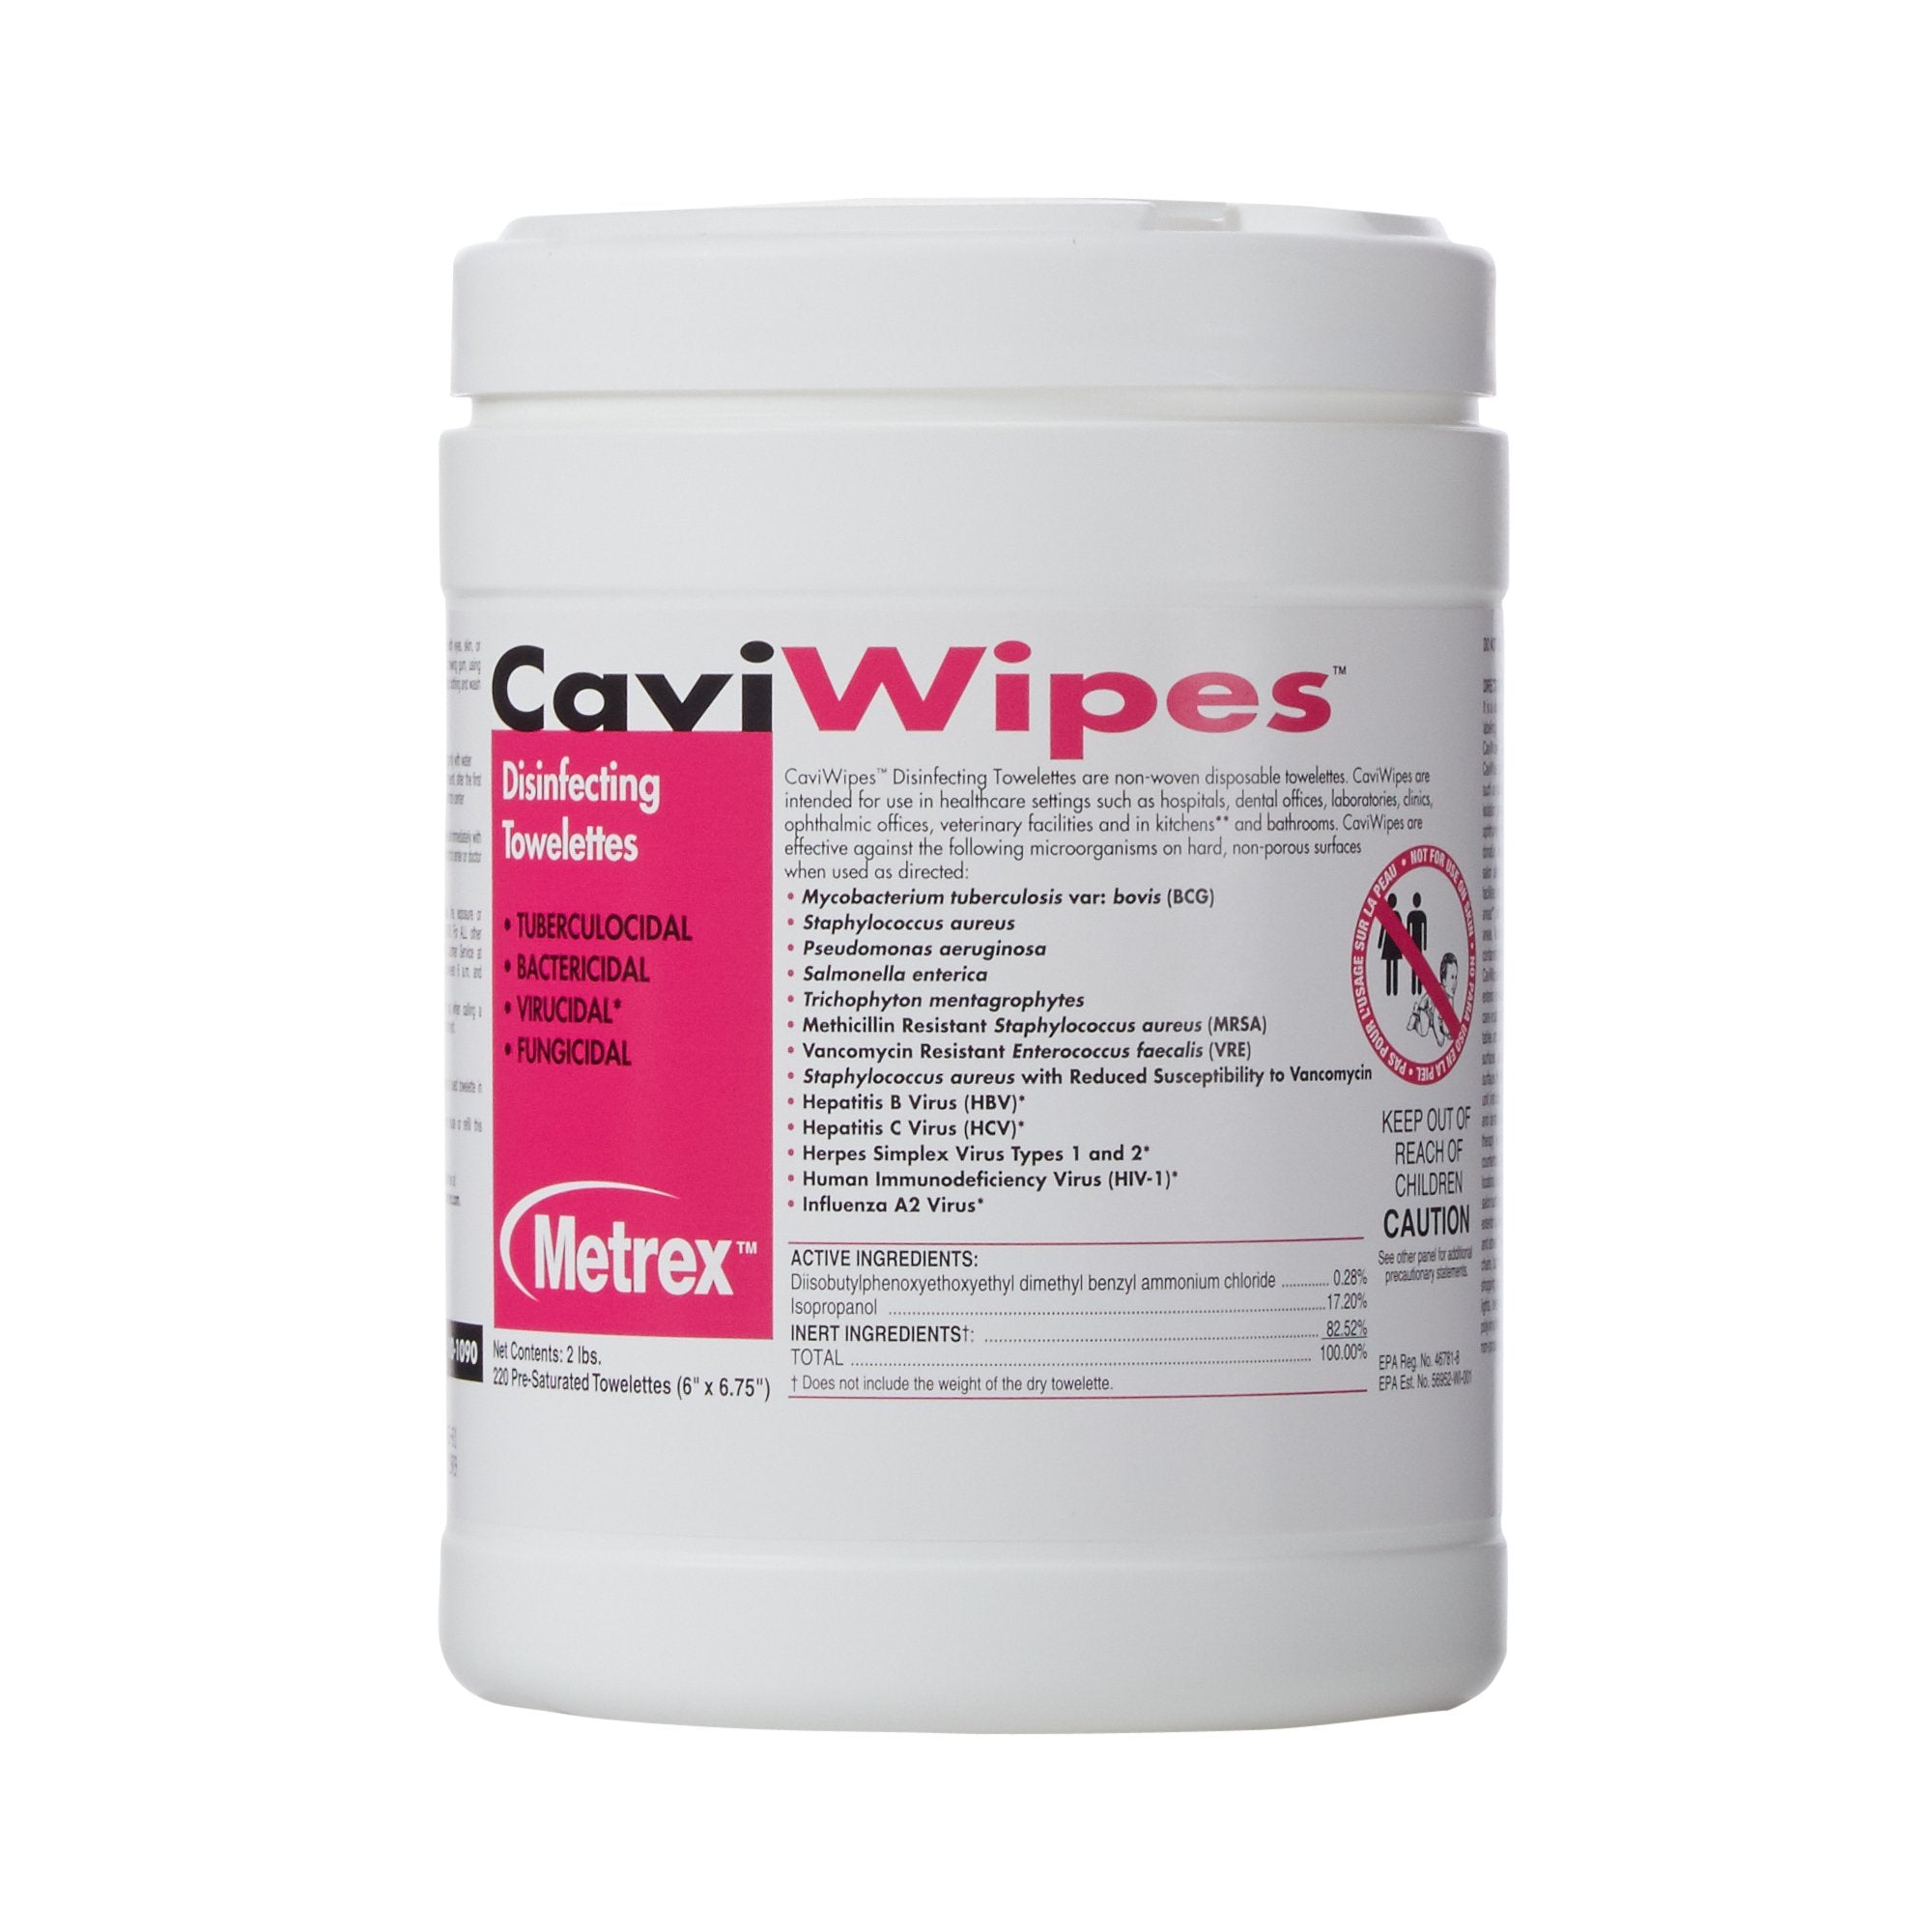 Metrex CaviWipes Surface Disinfectant Alcohol-Based Wipes, Non-Sterile, Disposable, Alcohol Scent, Canister, 6 X 6.75 Inch -Can of 1